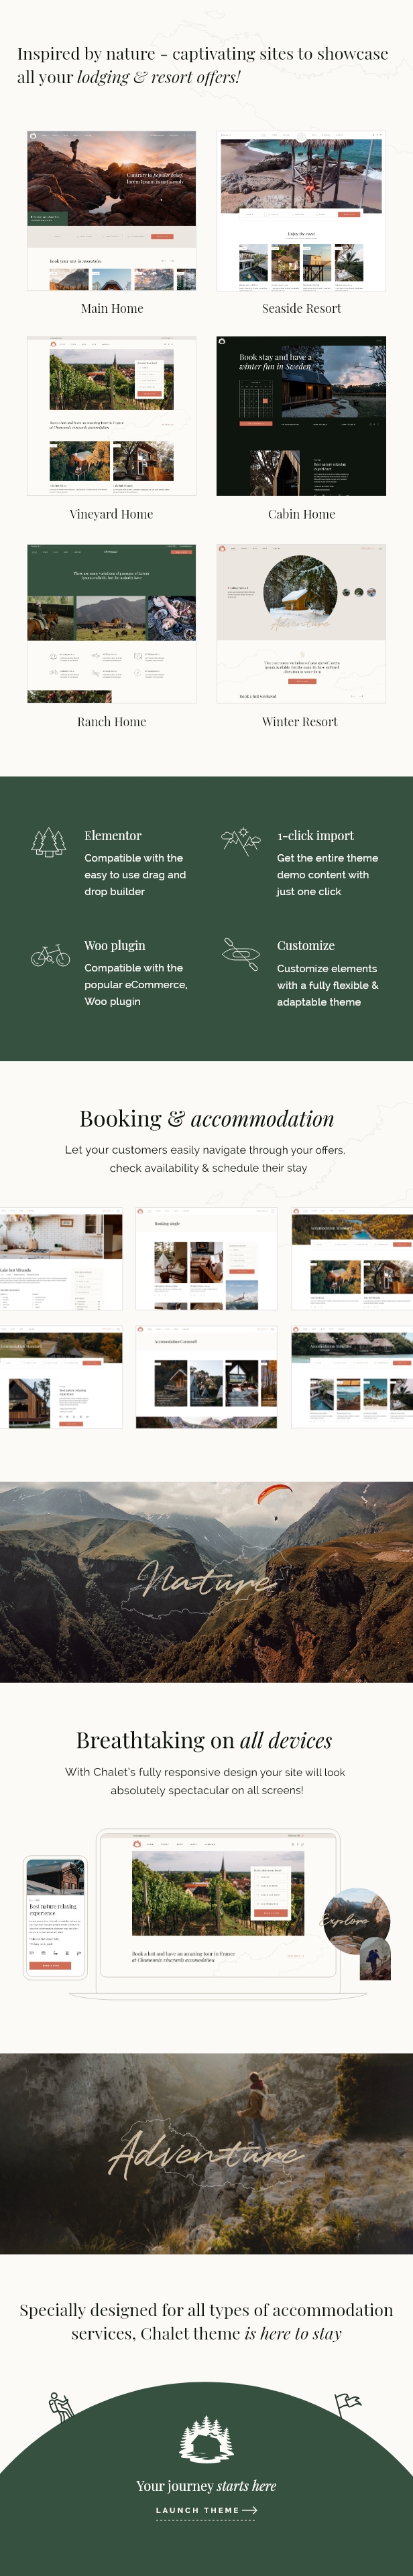 Chalet - Travel Accommodation Booking Theme - 3